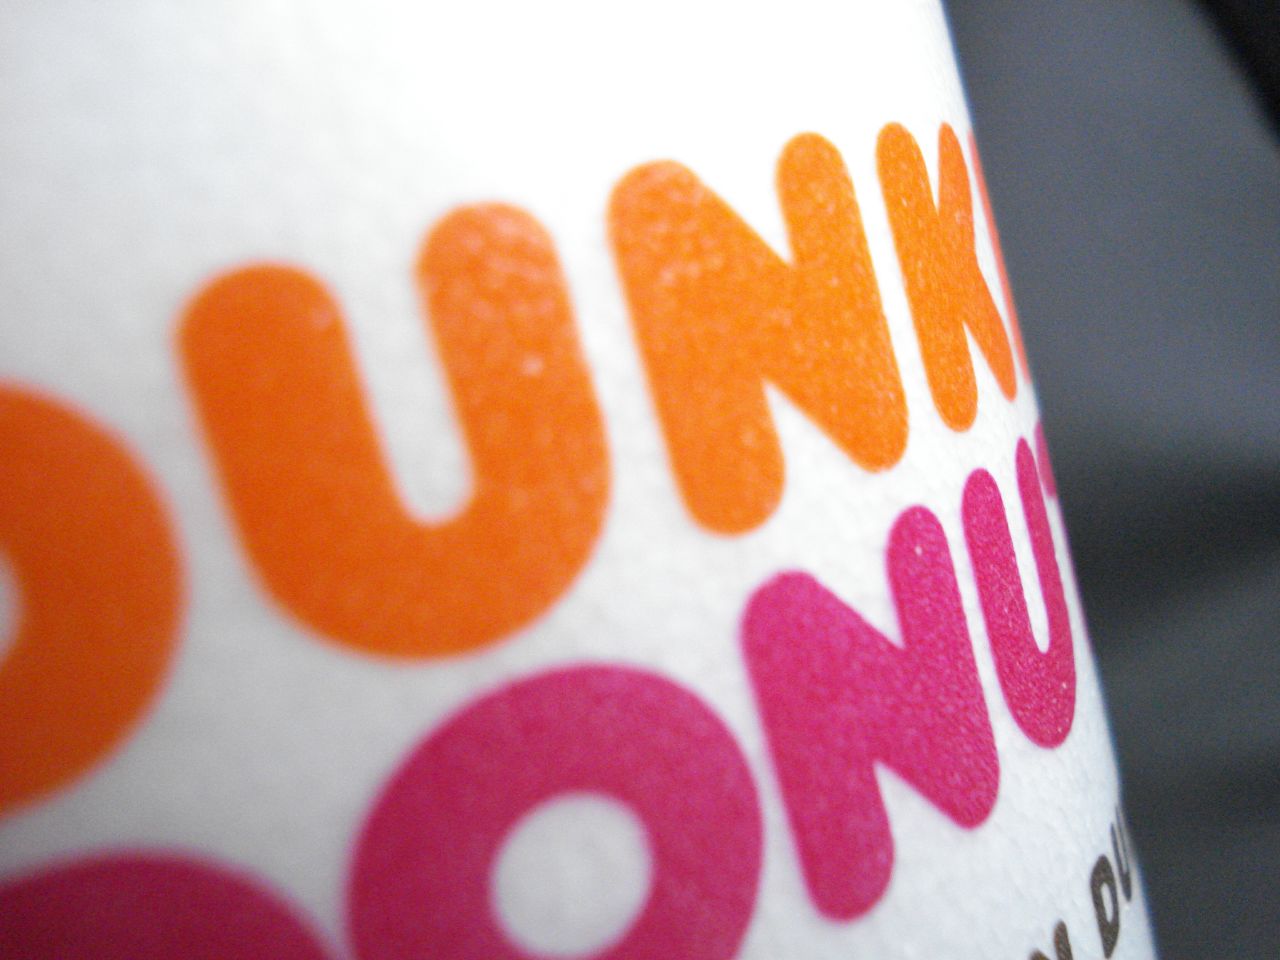 Lawsuit Claims Dunkin’ Donuts Overcharged NJ, NY Customers By $14 Million Over Three Years